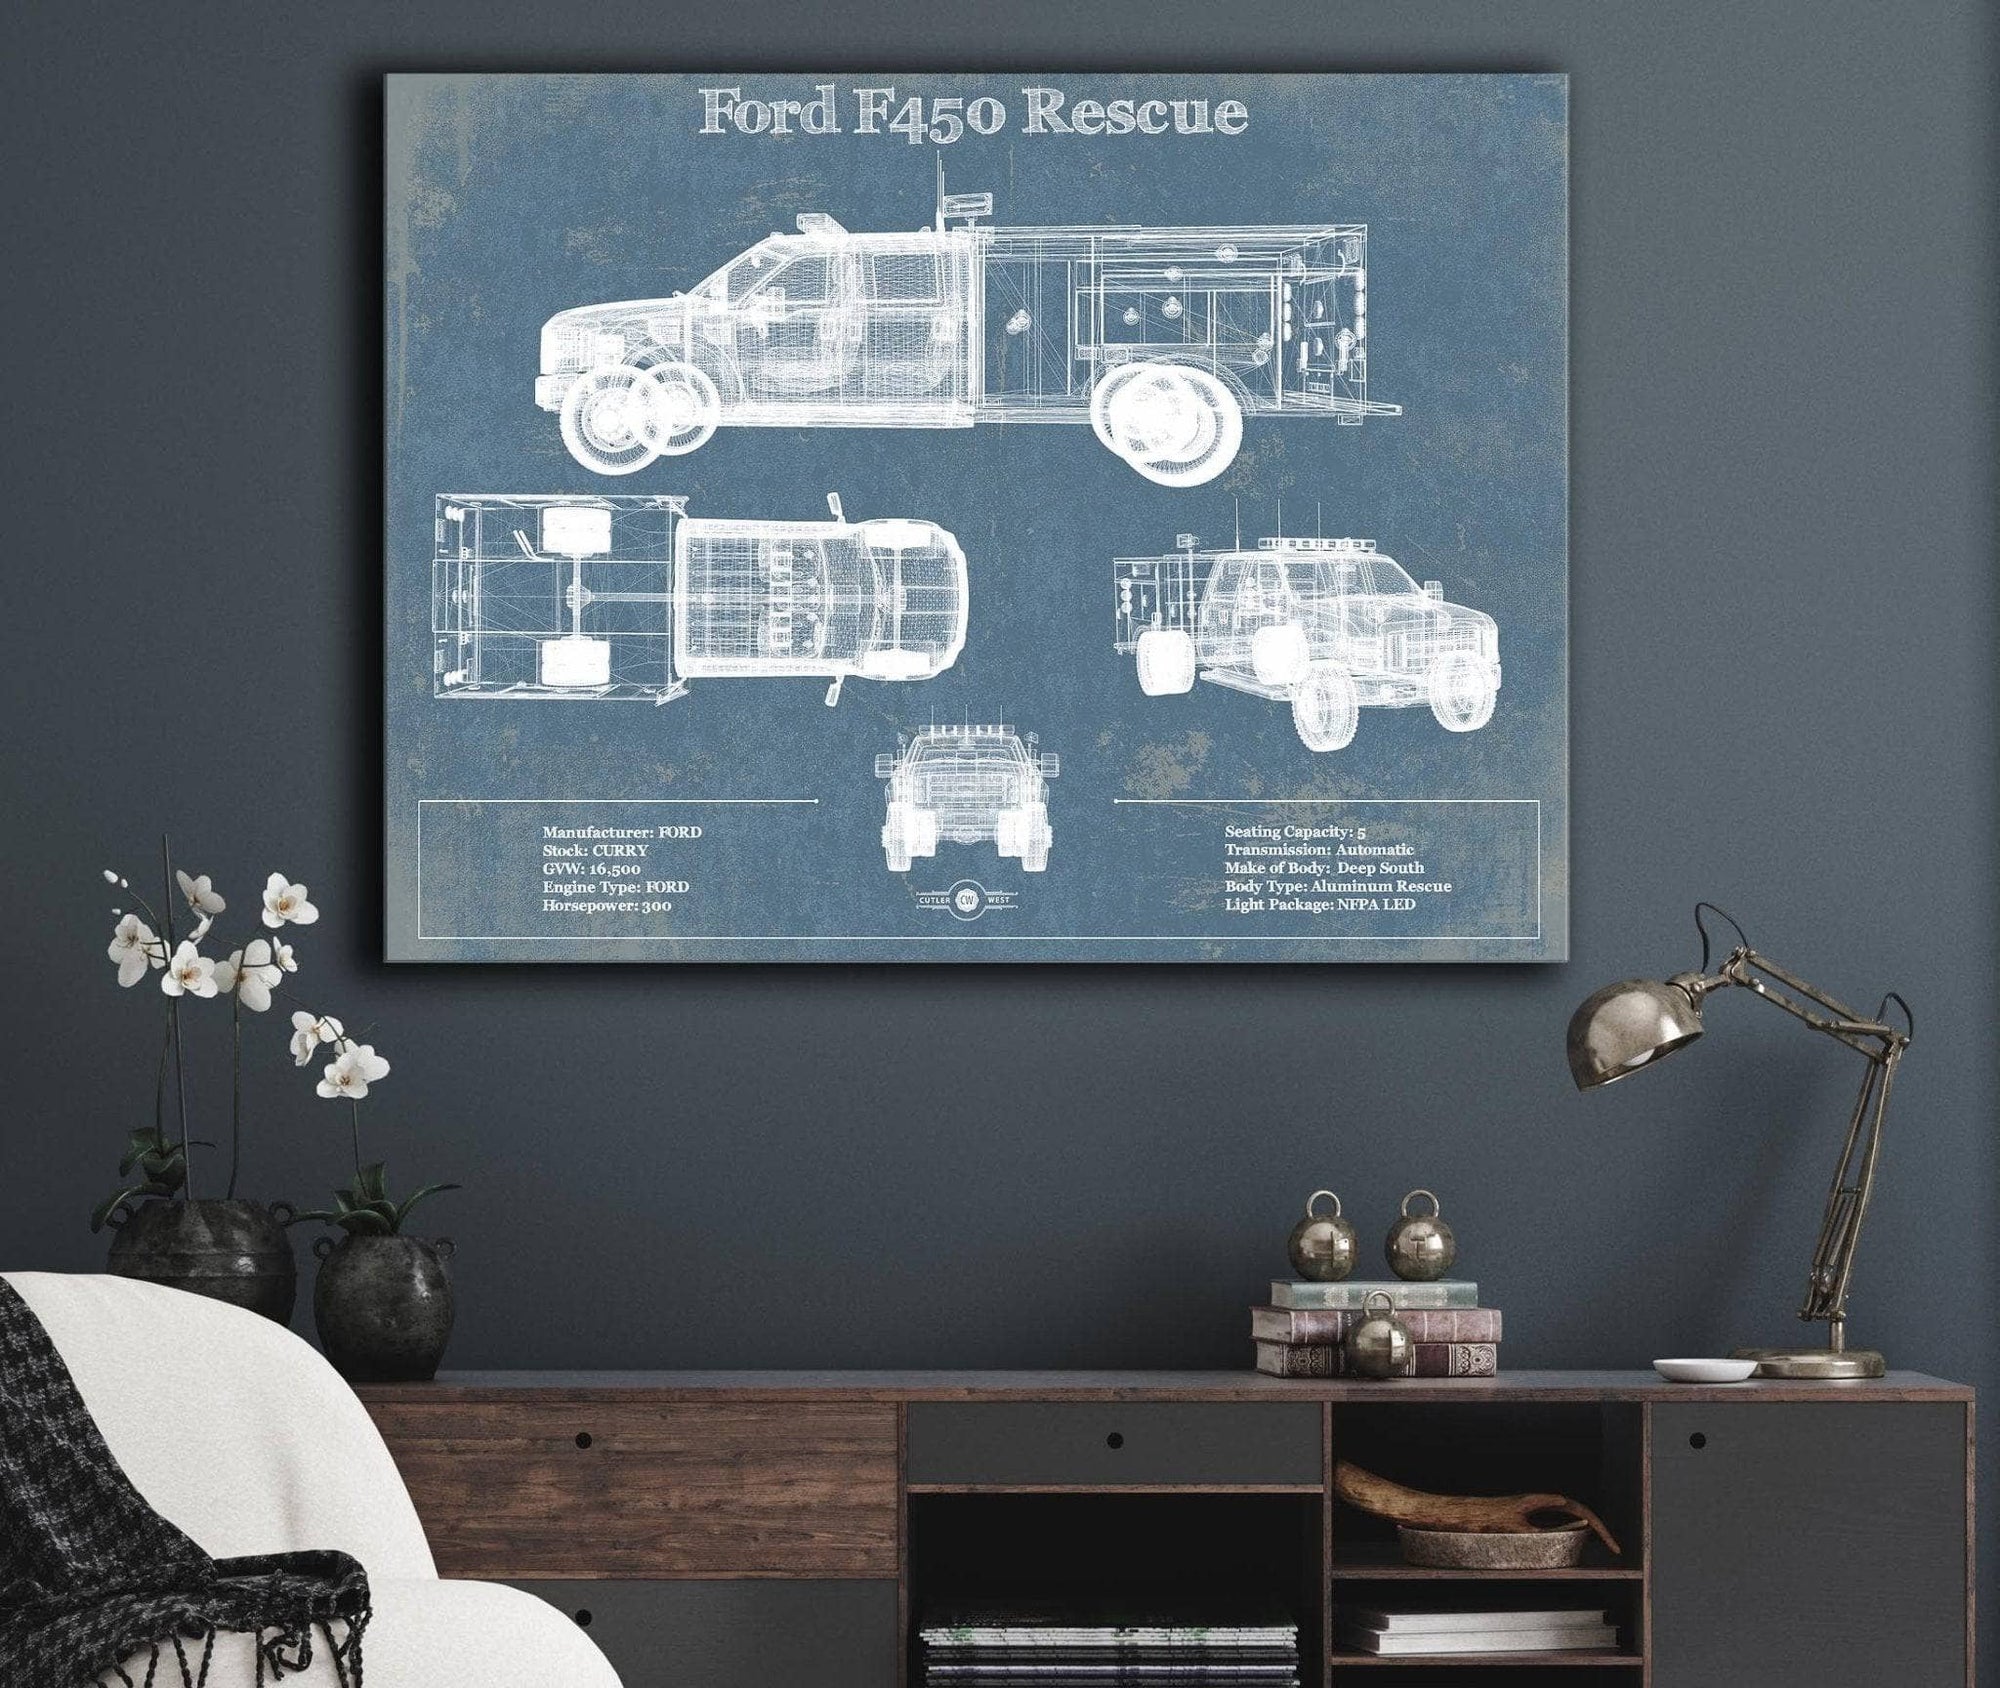 Cutler West Ford Collection Ford F450 Rescue Vehicle Vintage Blueprint Auto Print